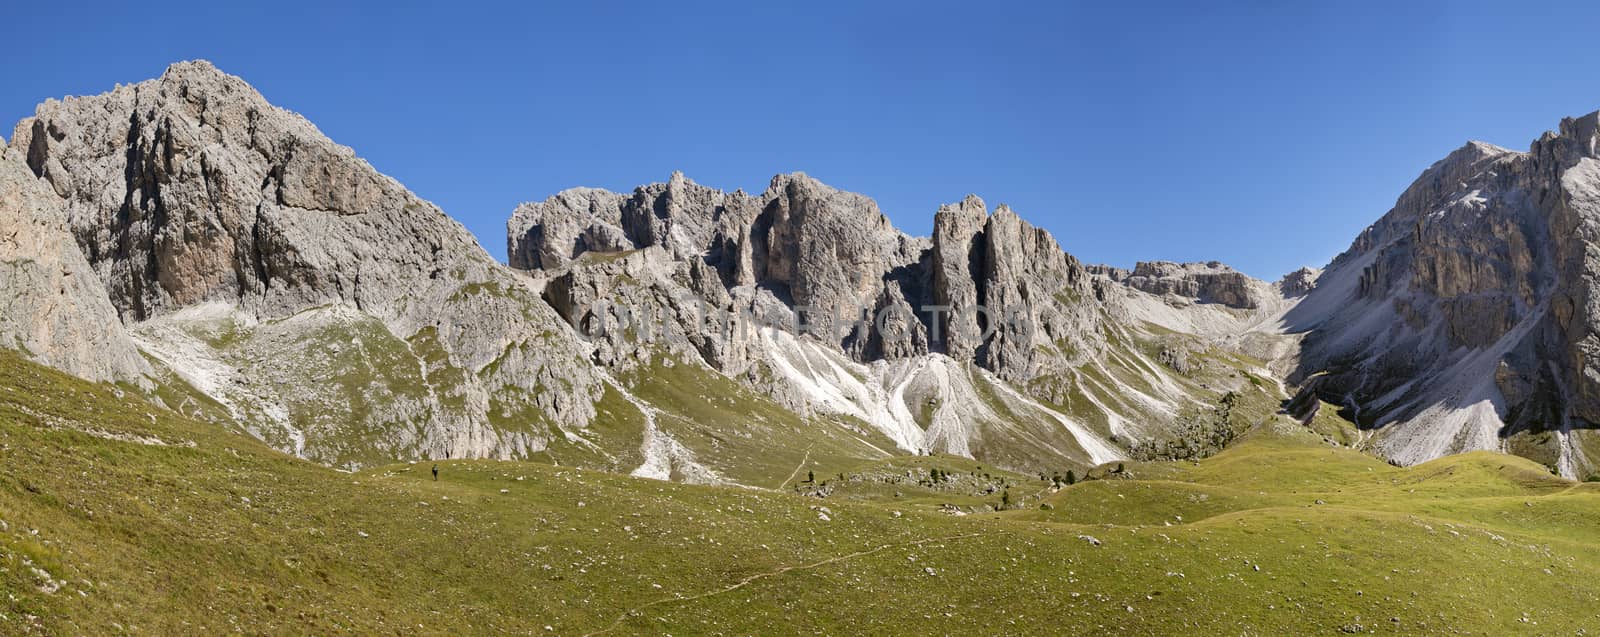 Dolomite Alps, panoramic landscape by Goodday